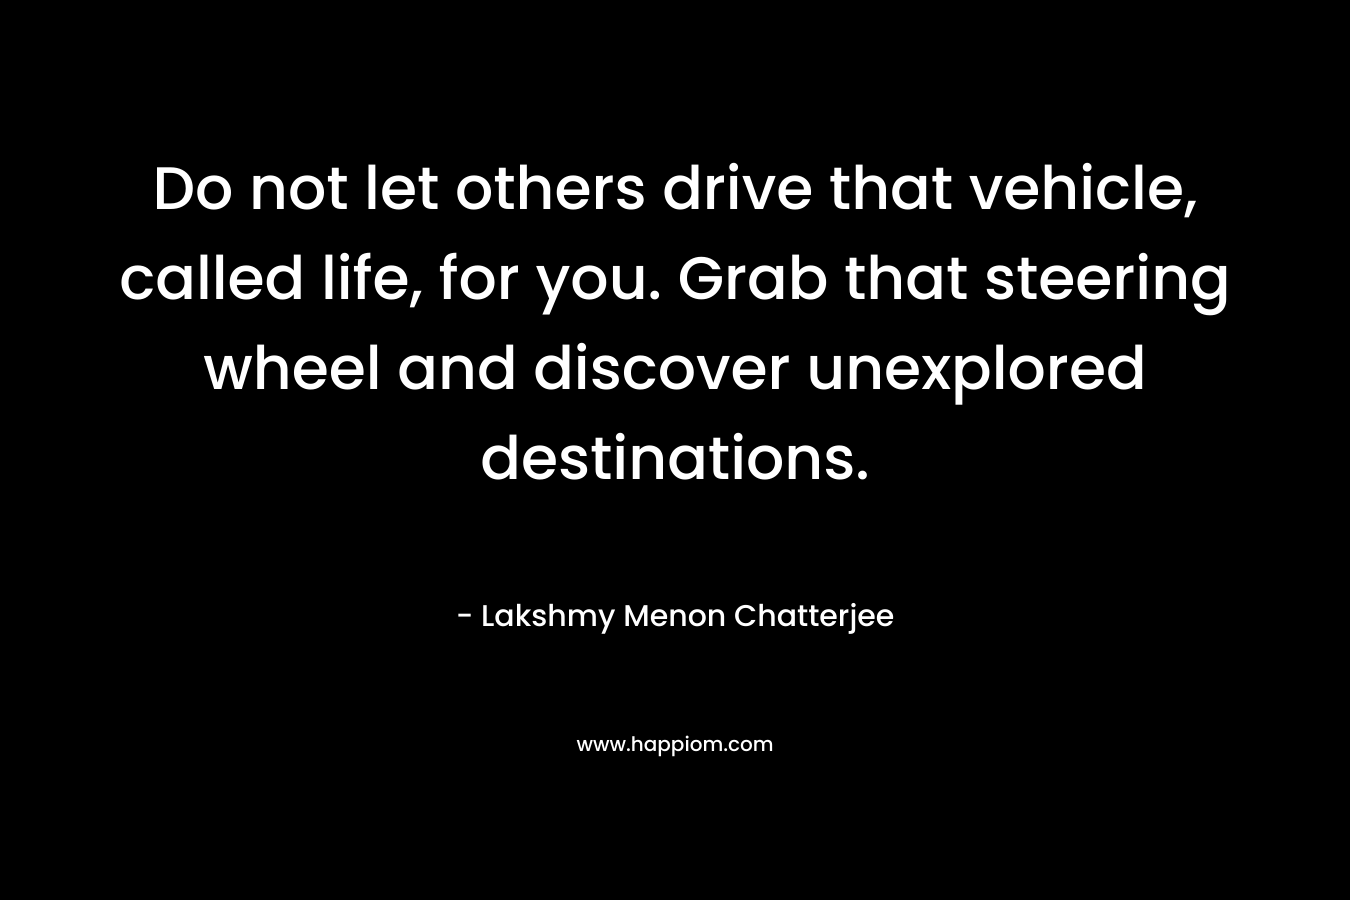 Do not let others drive that vehicle, called life, for you. Grab that steering wheel and discover unexplored destinations. – Lakshmy Menon Chatterjee